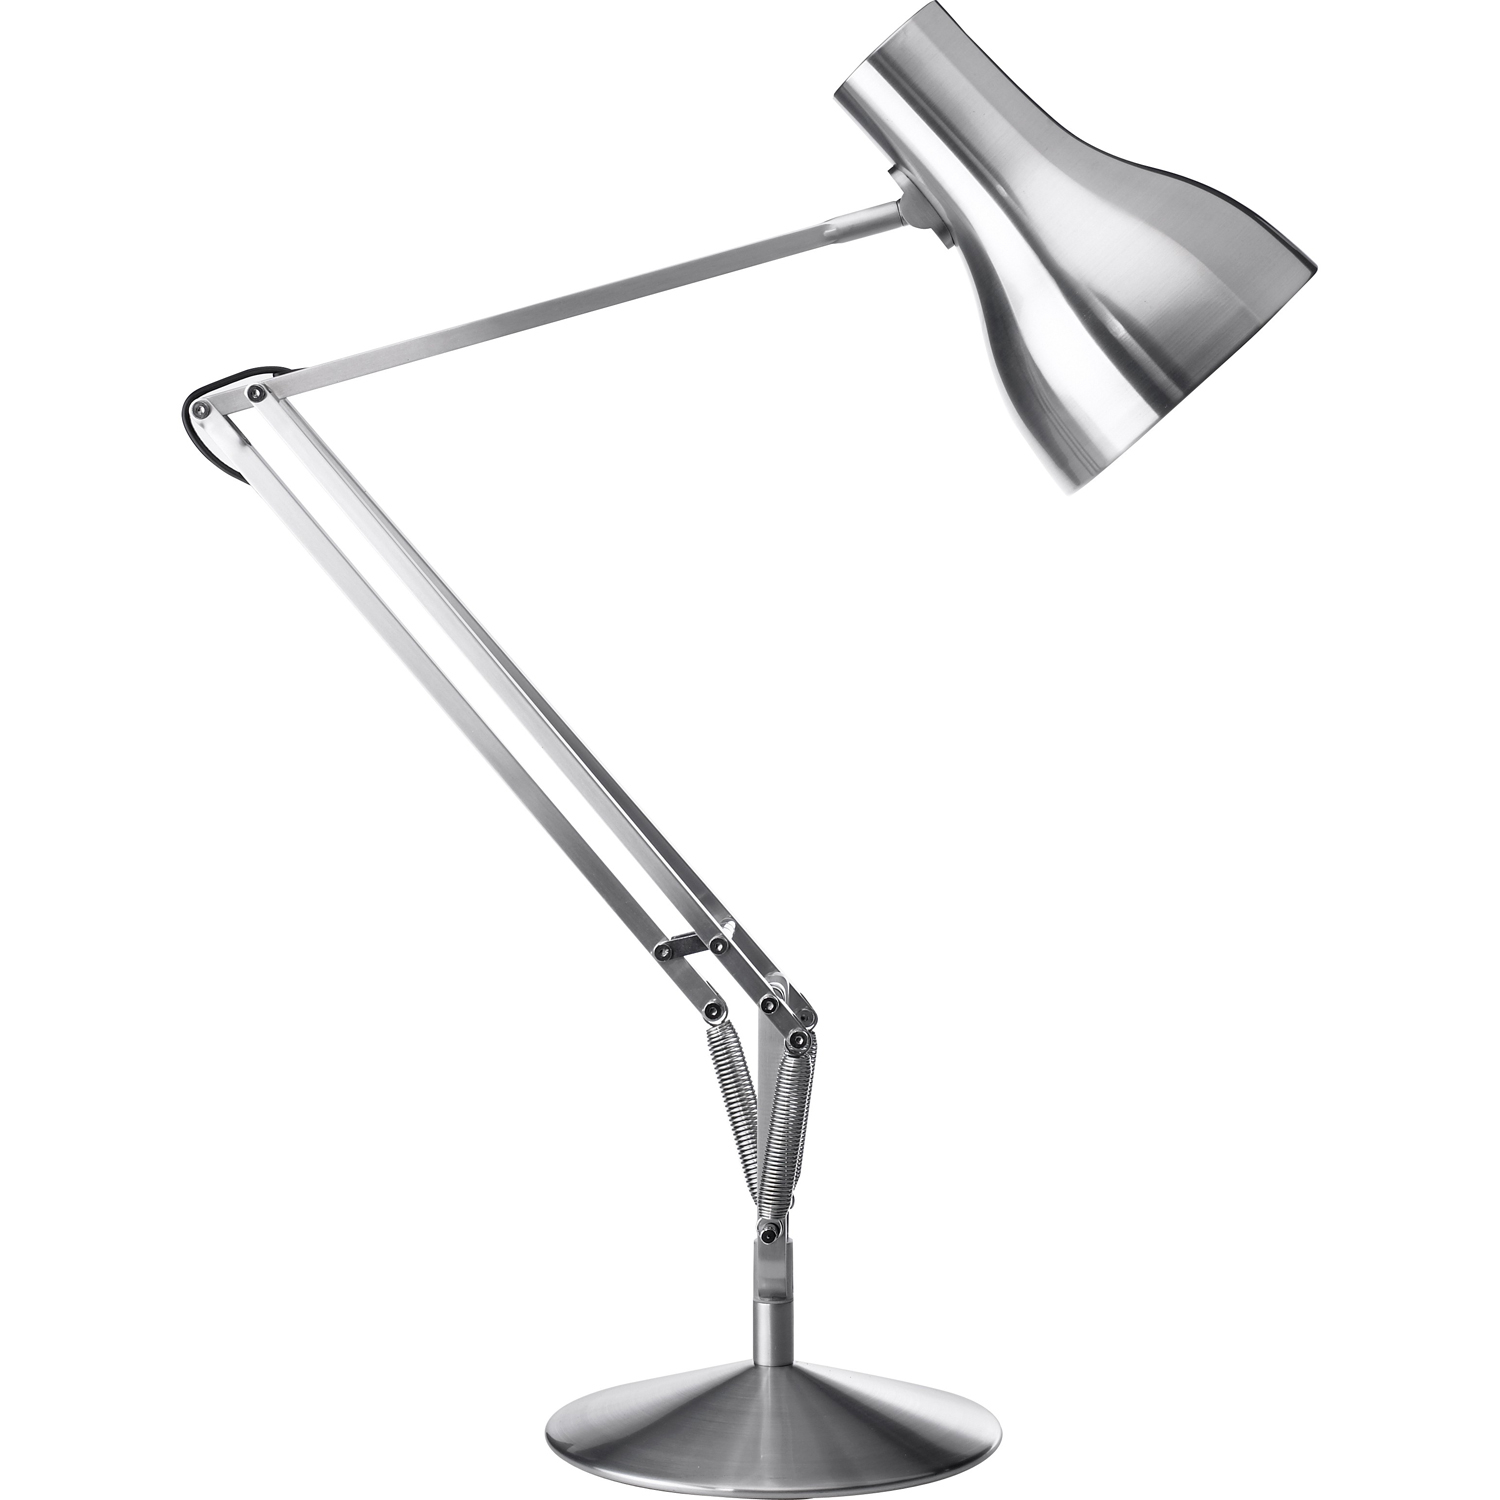 Furniture Fresh Best Office Desk Lamps Halogen In Office throughout sizing 1500 X 1500